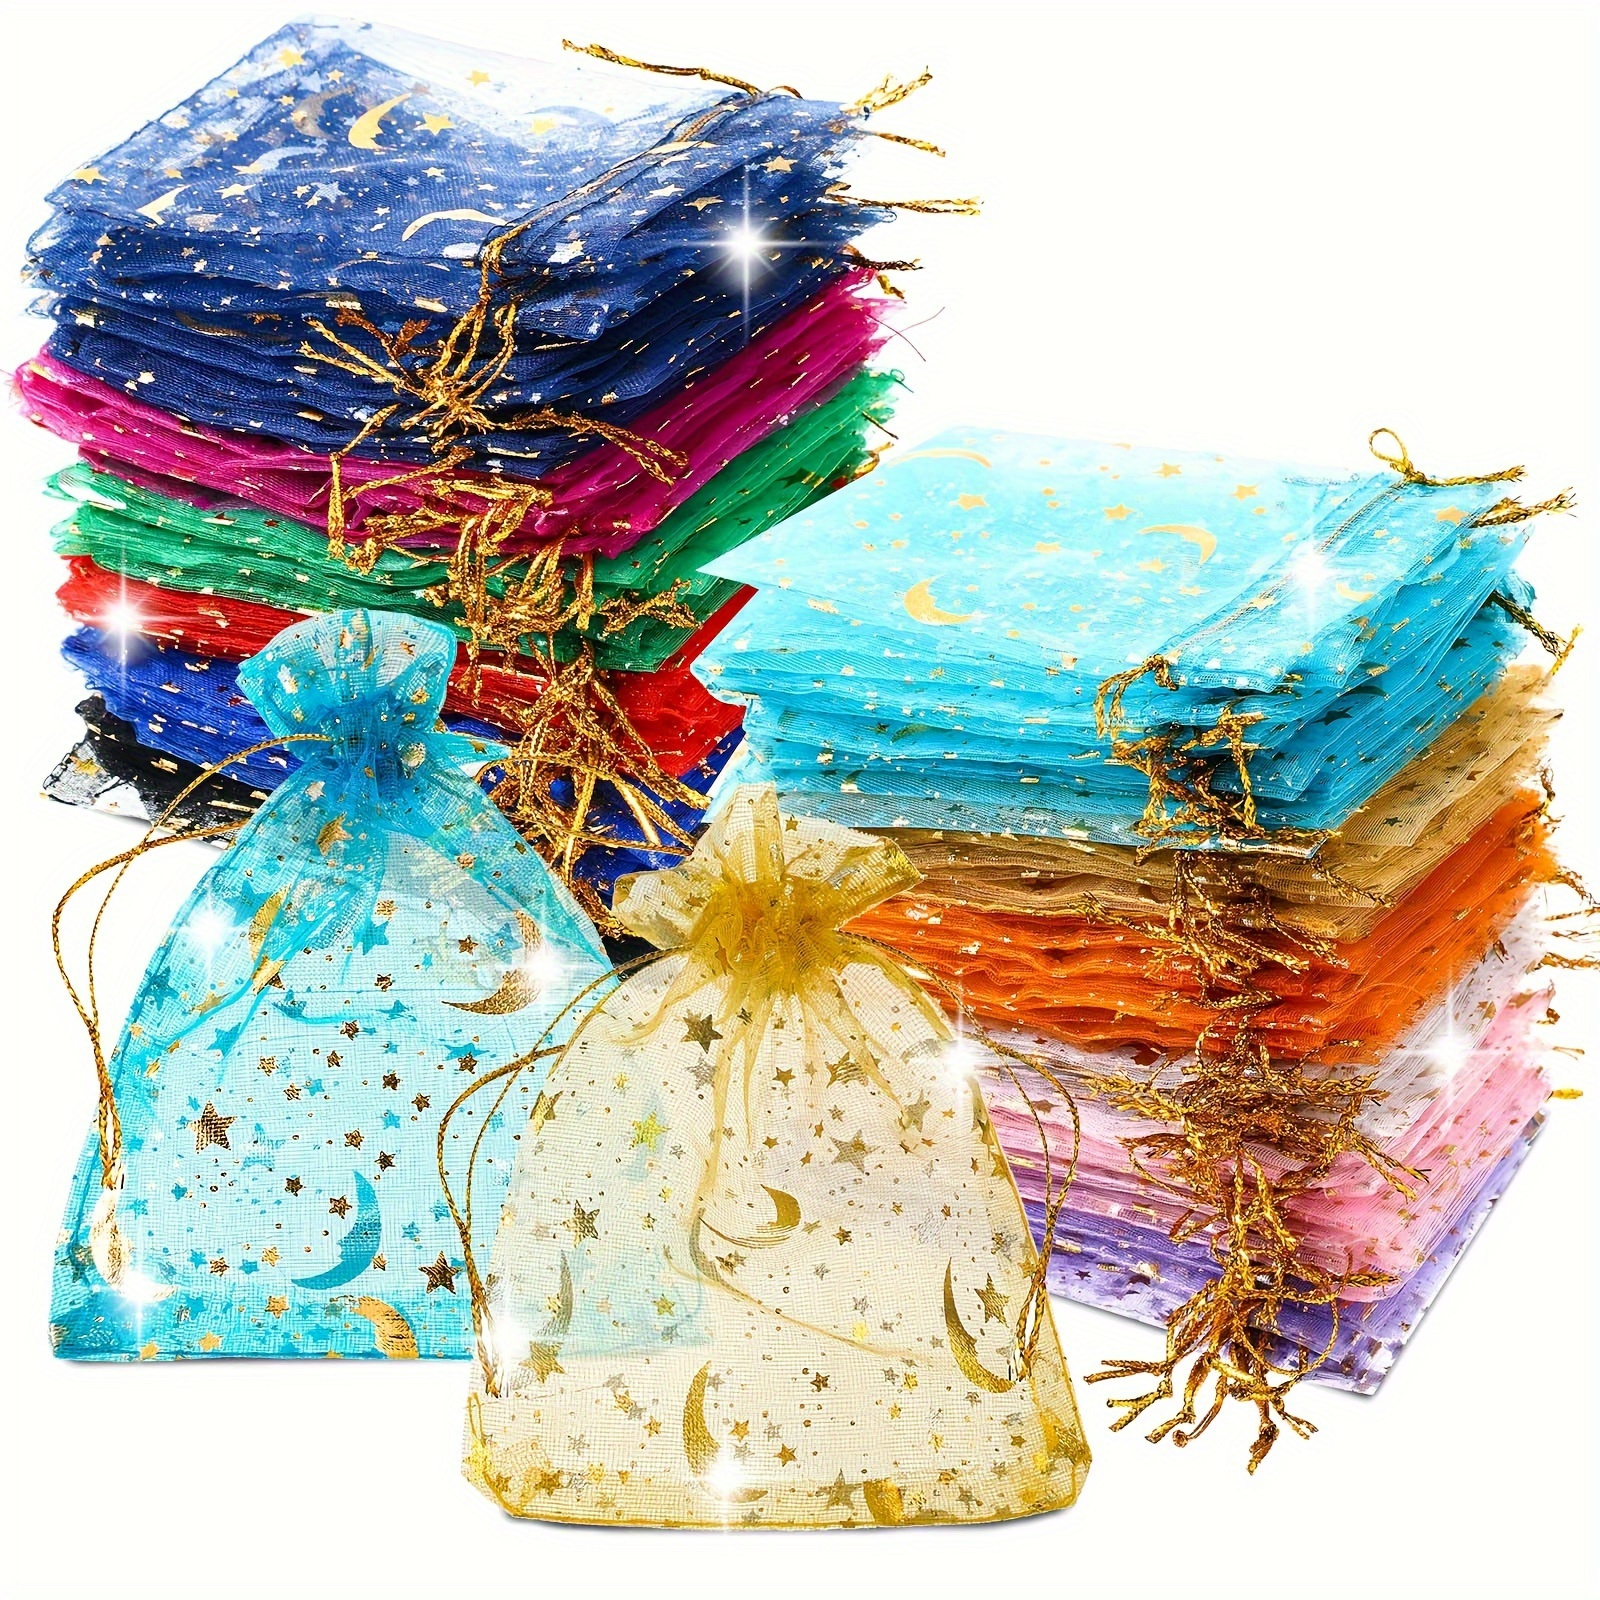 

50pcs Moon Star Organza Sheer Jewelry Drawstring Mesh Bags Assorted Colors Fashion Wedding Party Candy Wrap Gift Packaging Bags Bulk For Christmas Birthday Festival Supplies 7*9cm For Eid, Ramadan